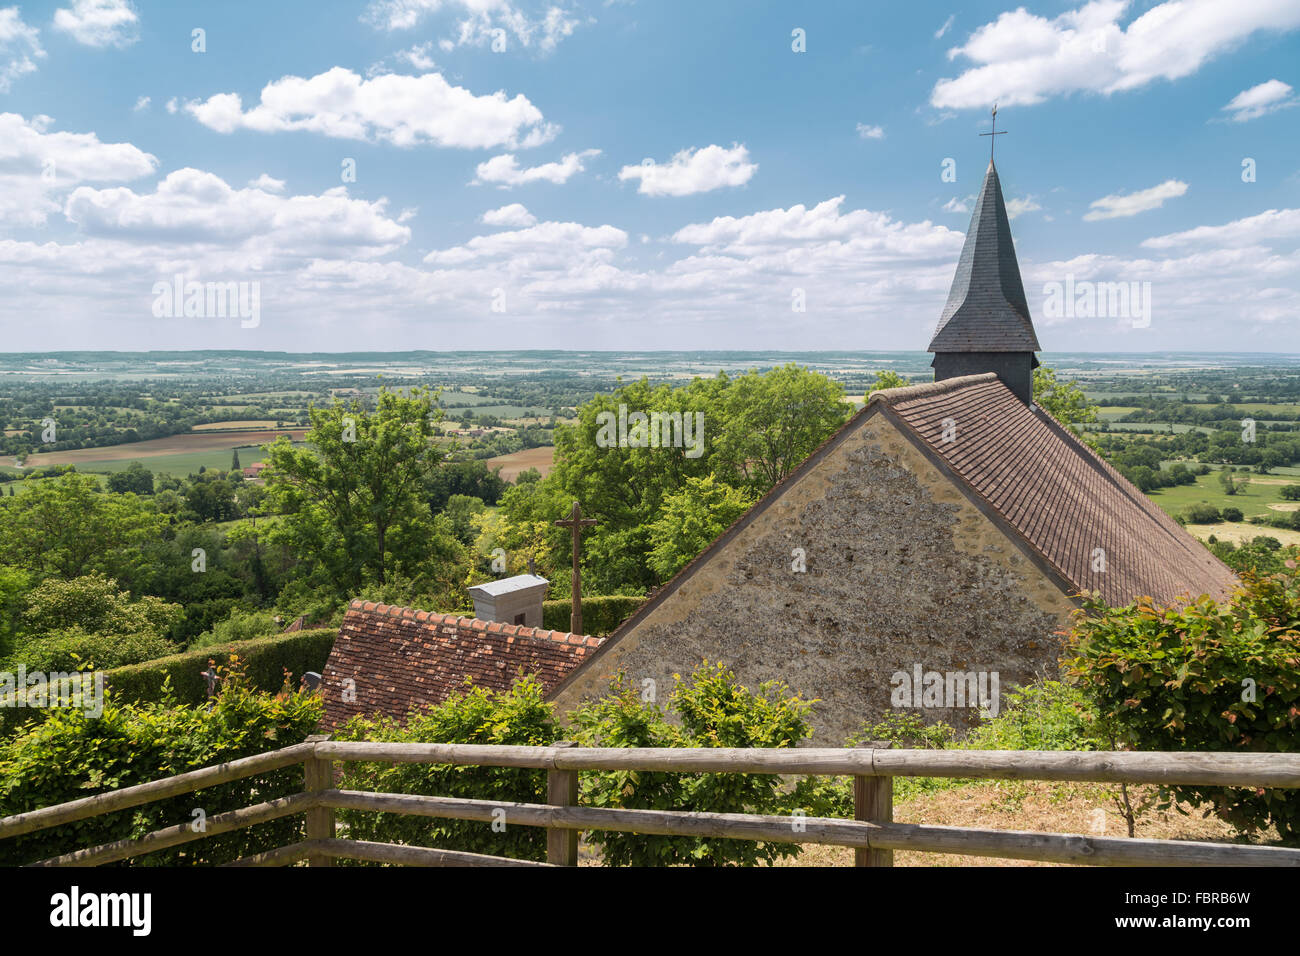 The church of Coudehard Orne (Eglise De Coudehard), on hill 262 high above the Falaise Pocket, Normandy, France Stock Photo